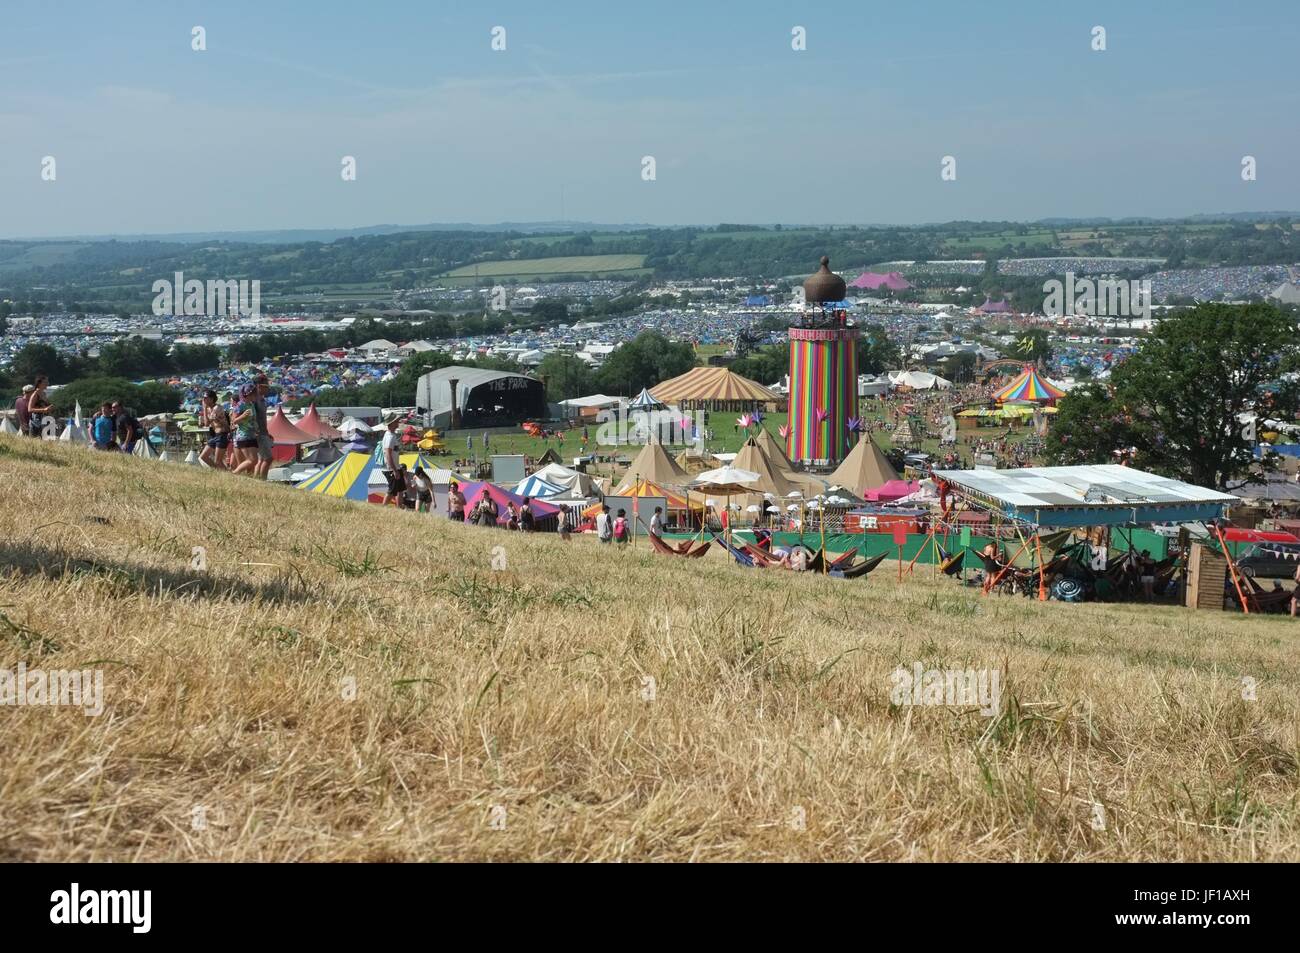 The view from the hill near the Park field overlooking Glastonbury Festival, Pilton, Somerset, England, United Kingdom, June 2017. Stock Photo